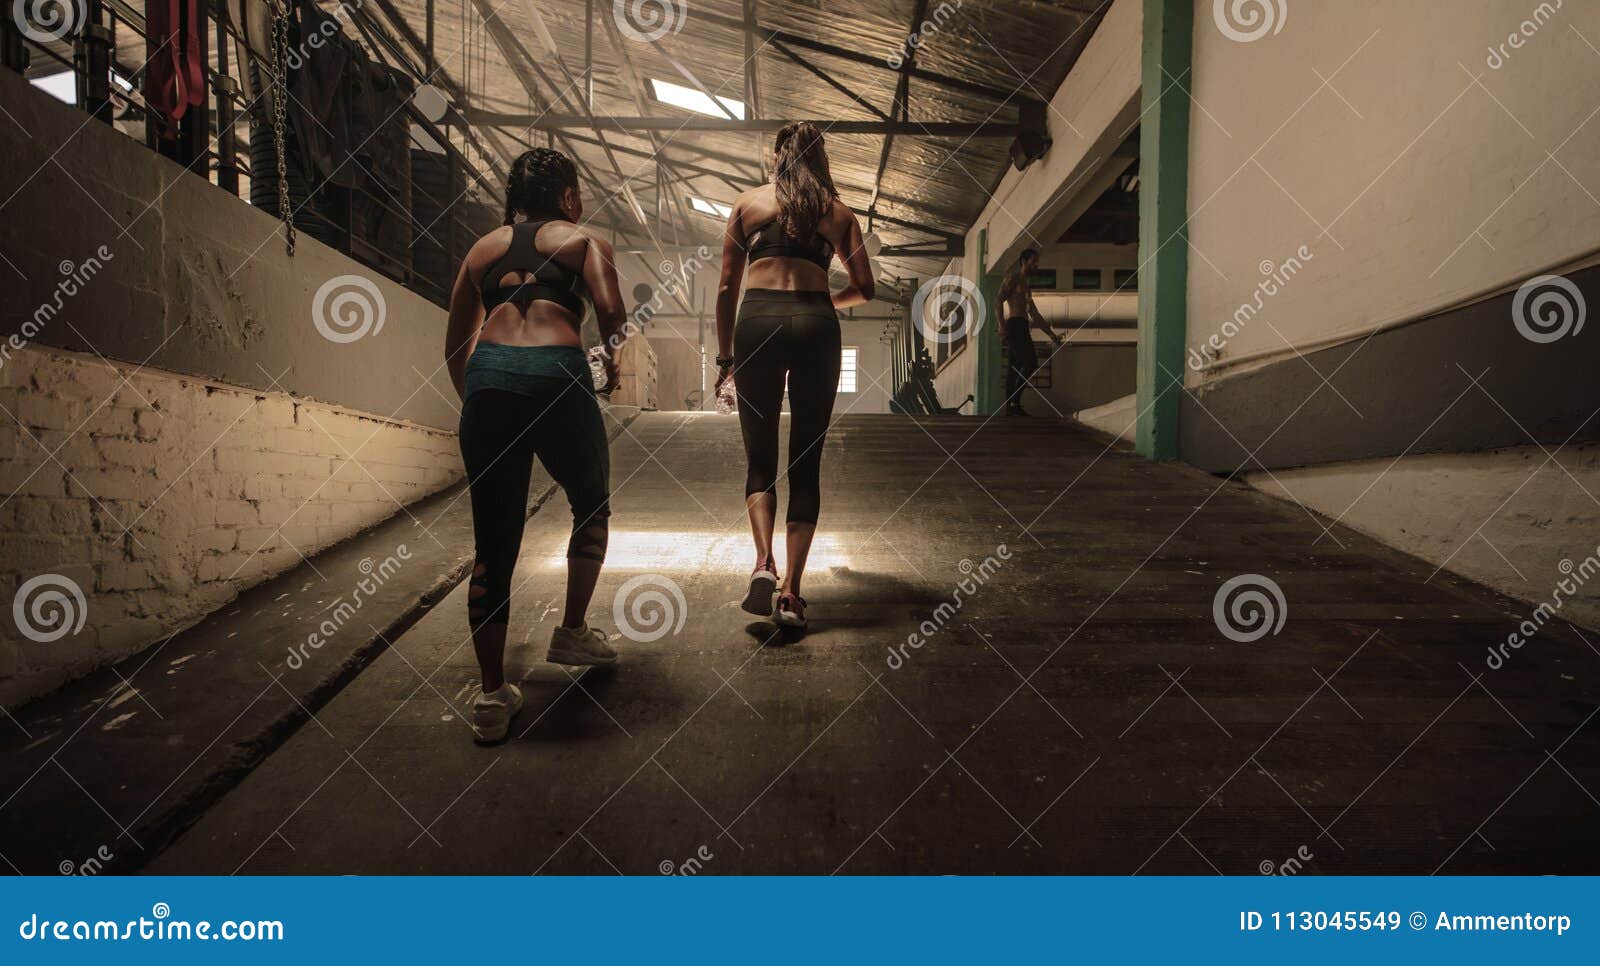 Women Going in the Cross Training Gym Stock Image - Image of club ...